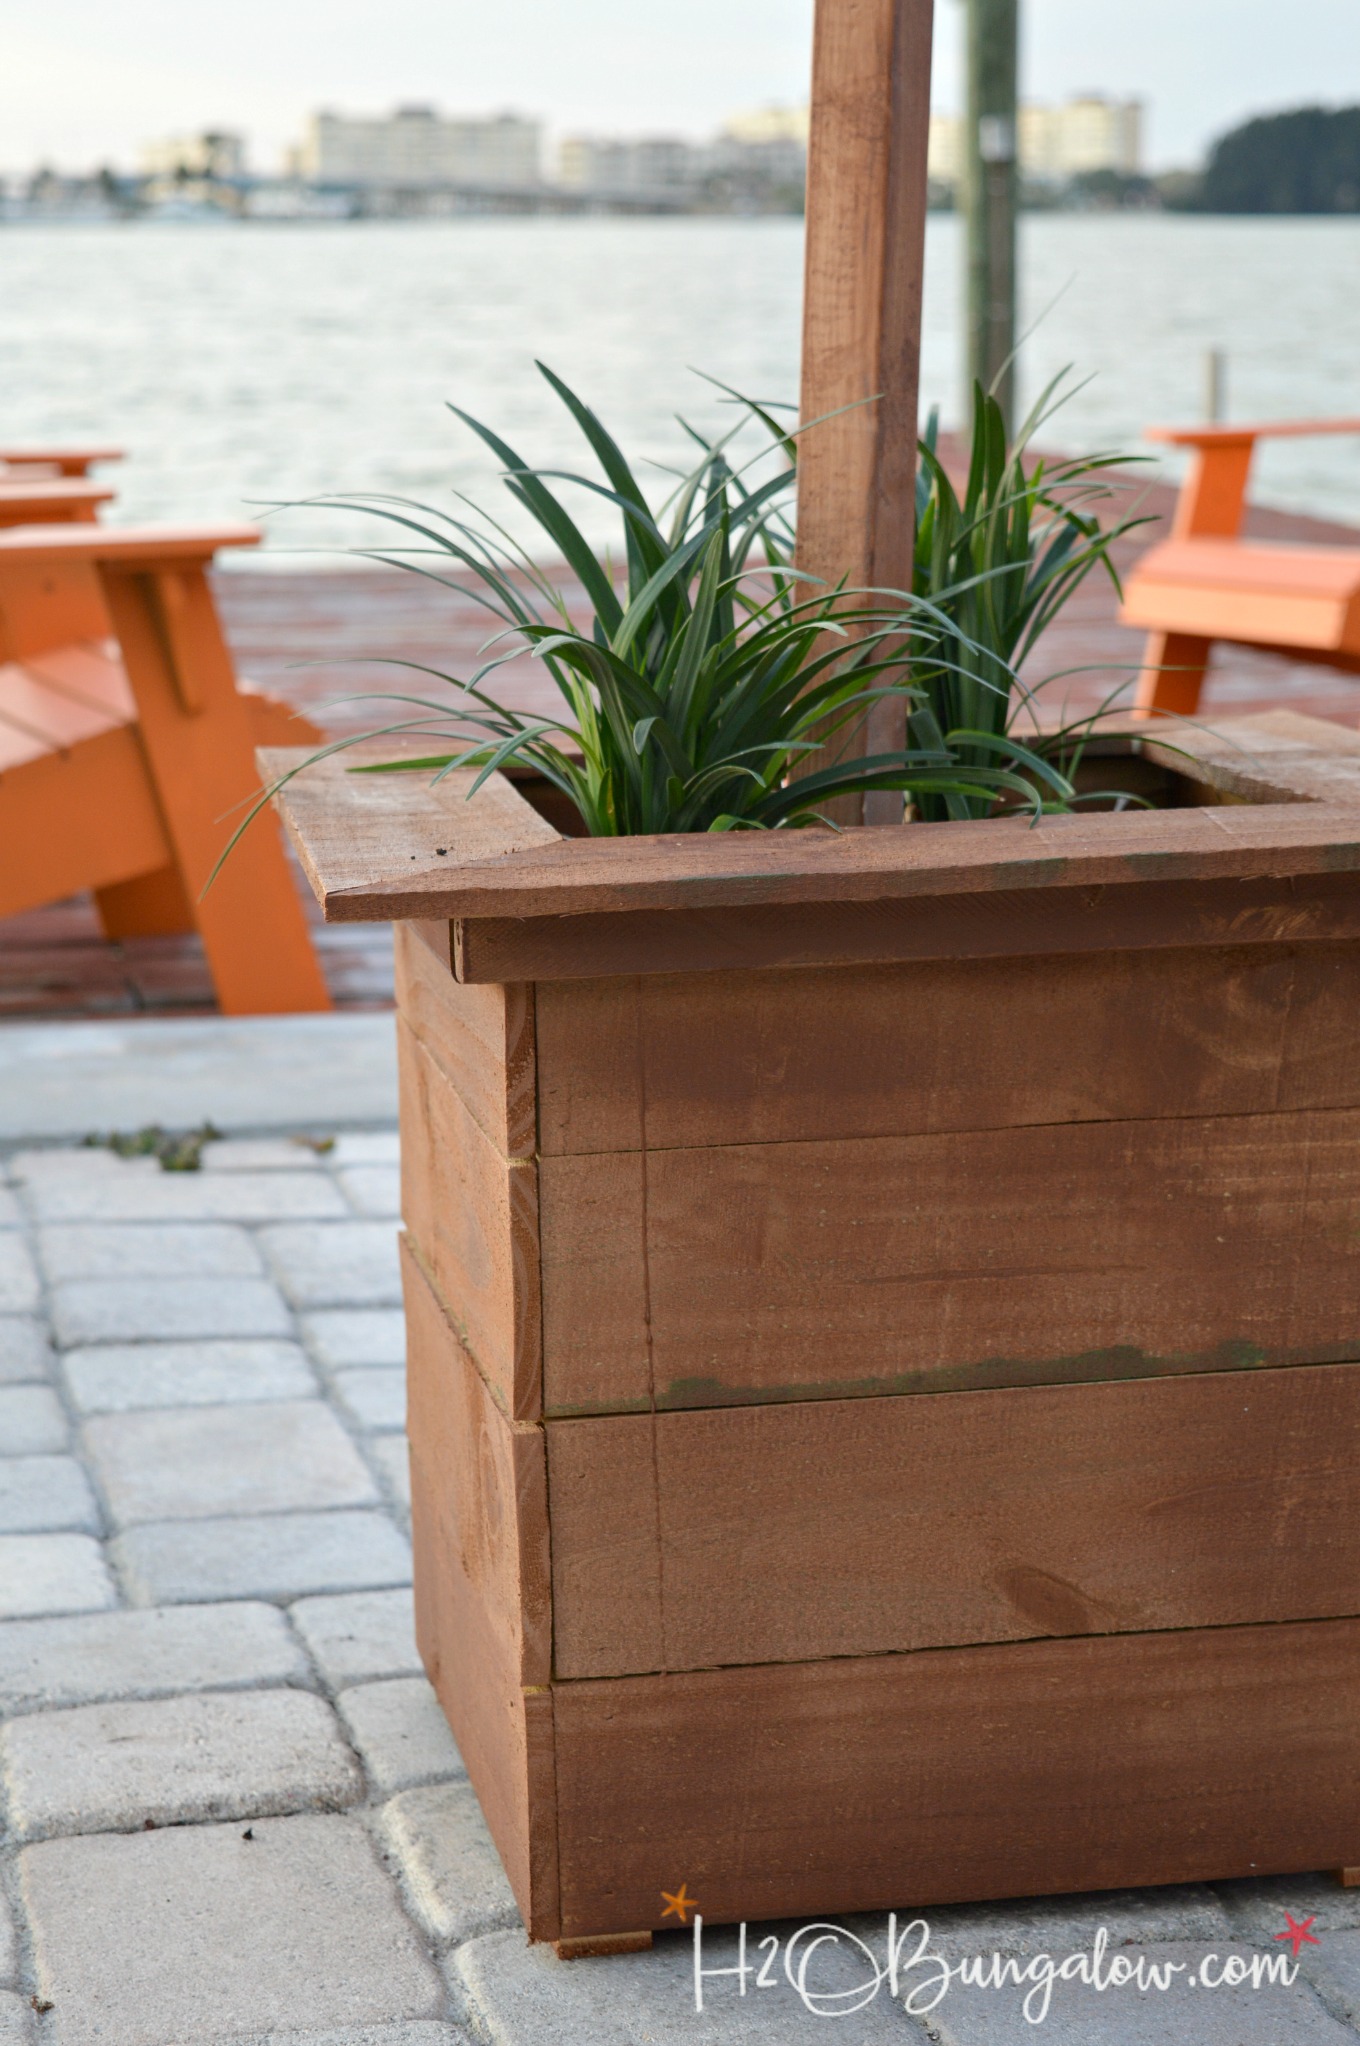 DIY outdoor cedar box shown with plants and pole for outdoor string lights.